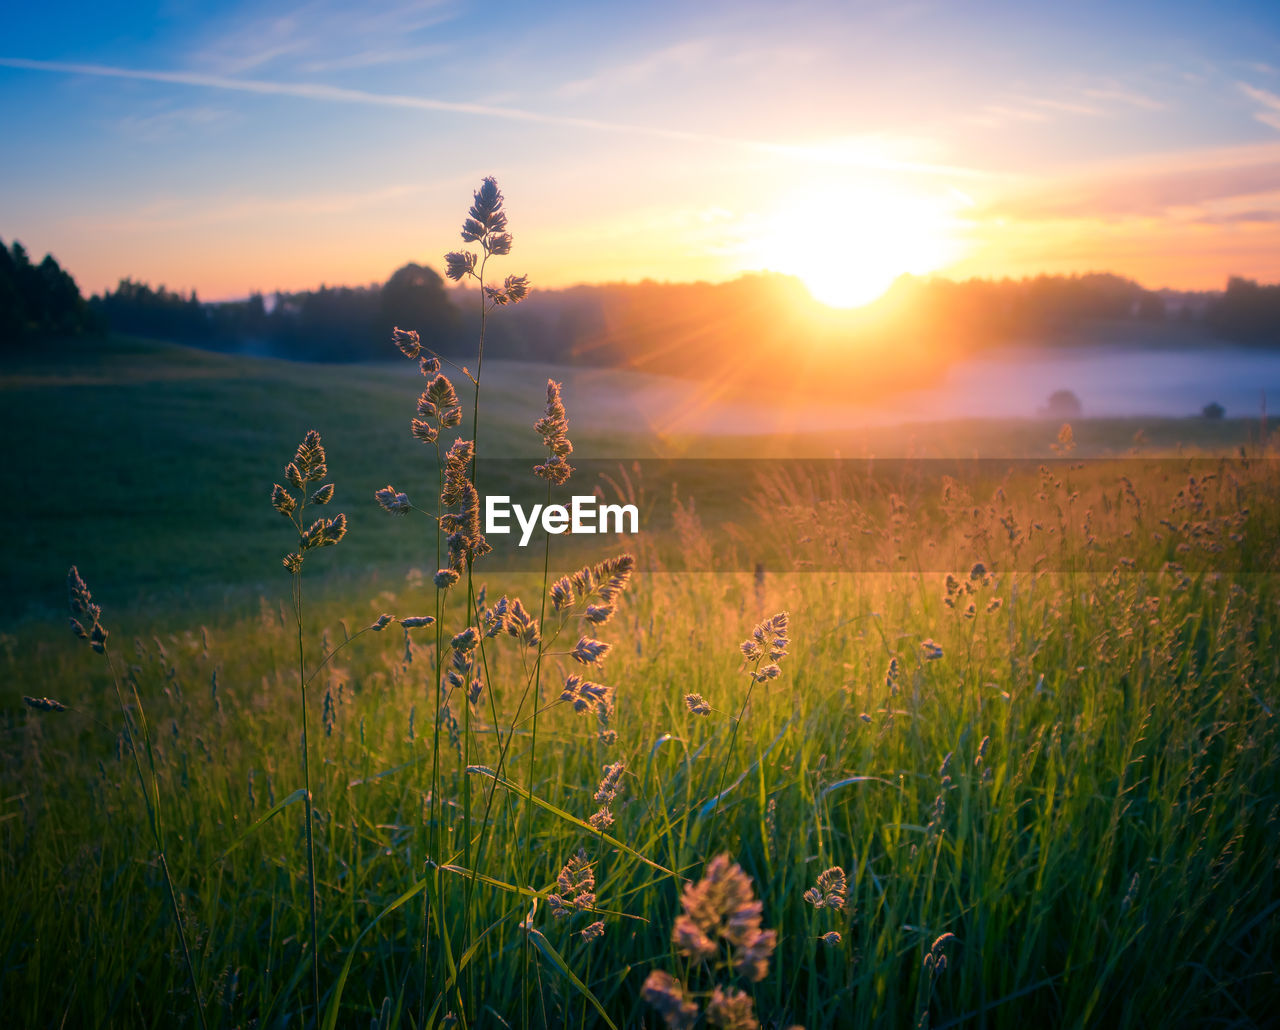 nature, sky, plant, landscape, environment, morning, sunlight, beauty in nature, land, field, sun, horizon, grass, scenics - nature, sunrise, tranquility, cloud, tranquil scene, dawn, twilight, rural scene, sunbeam, grassland, summer, natural environment, idyllic, meadow, tree, plain, no people, non-urban scene, lens flare, growth, back lit, flower, wildflower, outdoors, freshness, prairie, flowering plant, multi colored, forest, agriculture, green, hill, water, blue, light - natural phenomenon, fog, leaf, dramatic sky, vibrant color, rural area, horizon over land, springtime, light, yellow, social issues, travel, urban skyline, environmental conservation, gold, crop, atmospheric mood, travel destinations, backgrounds, orange color, glowing, reflection, silhouette